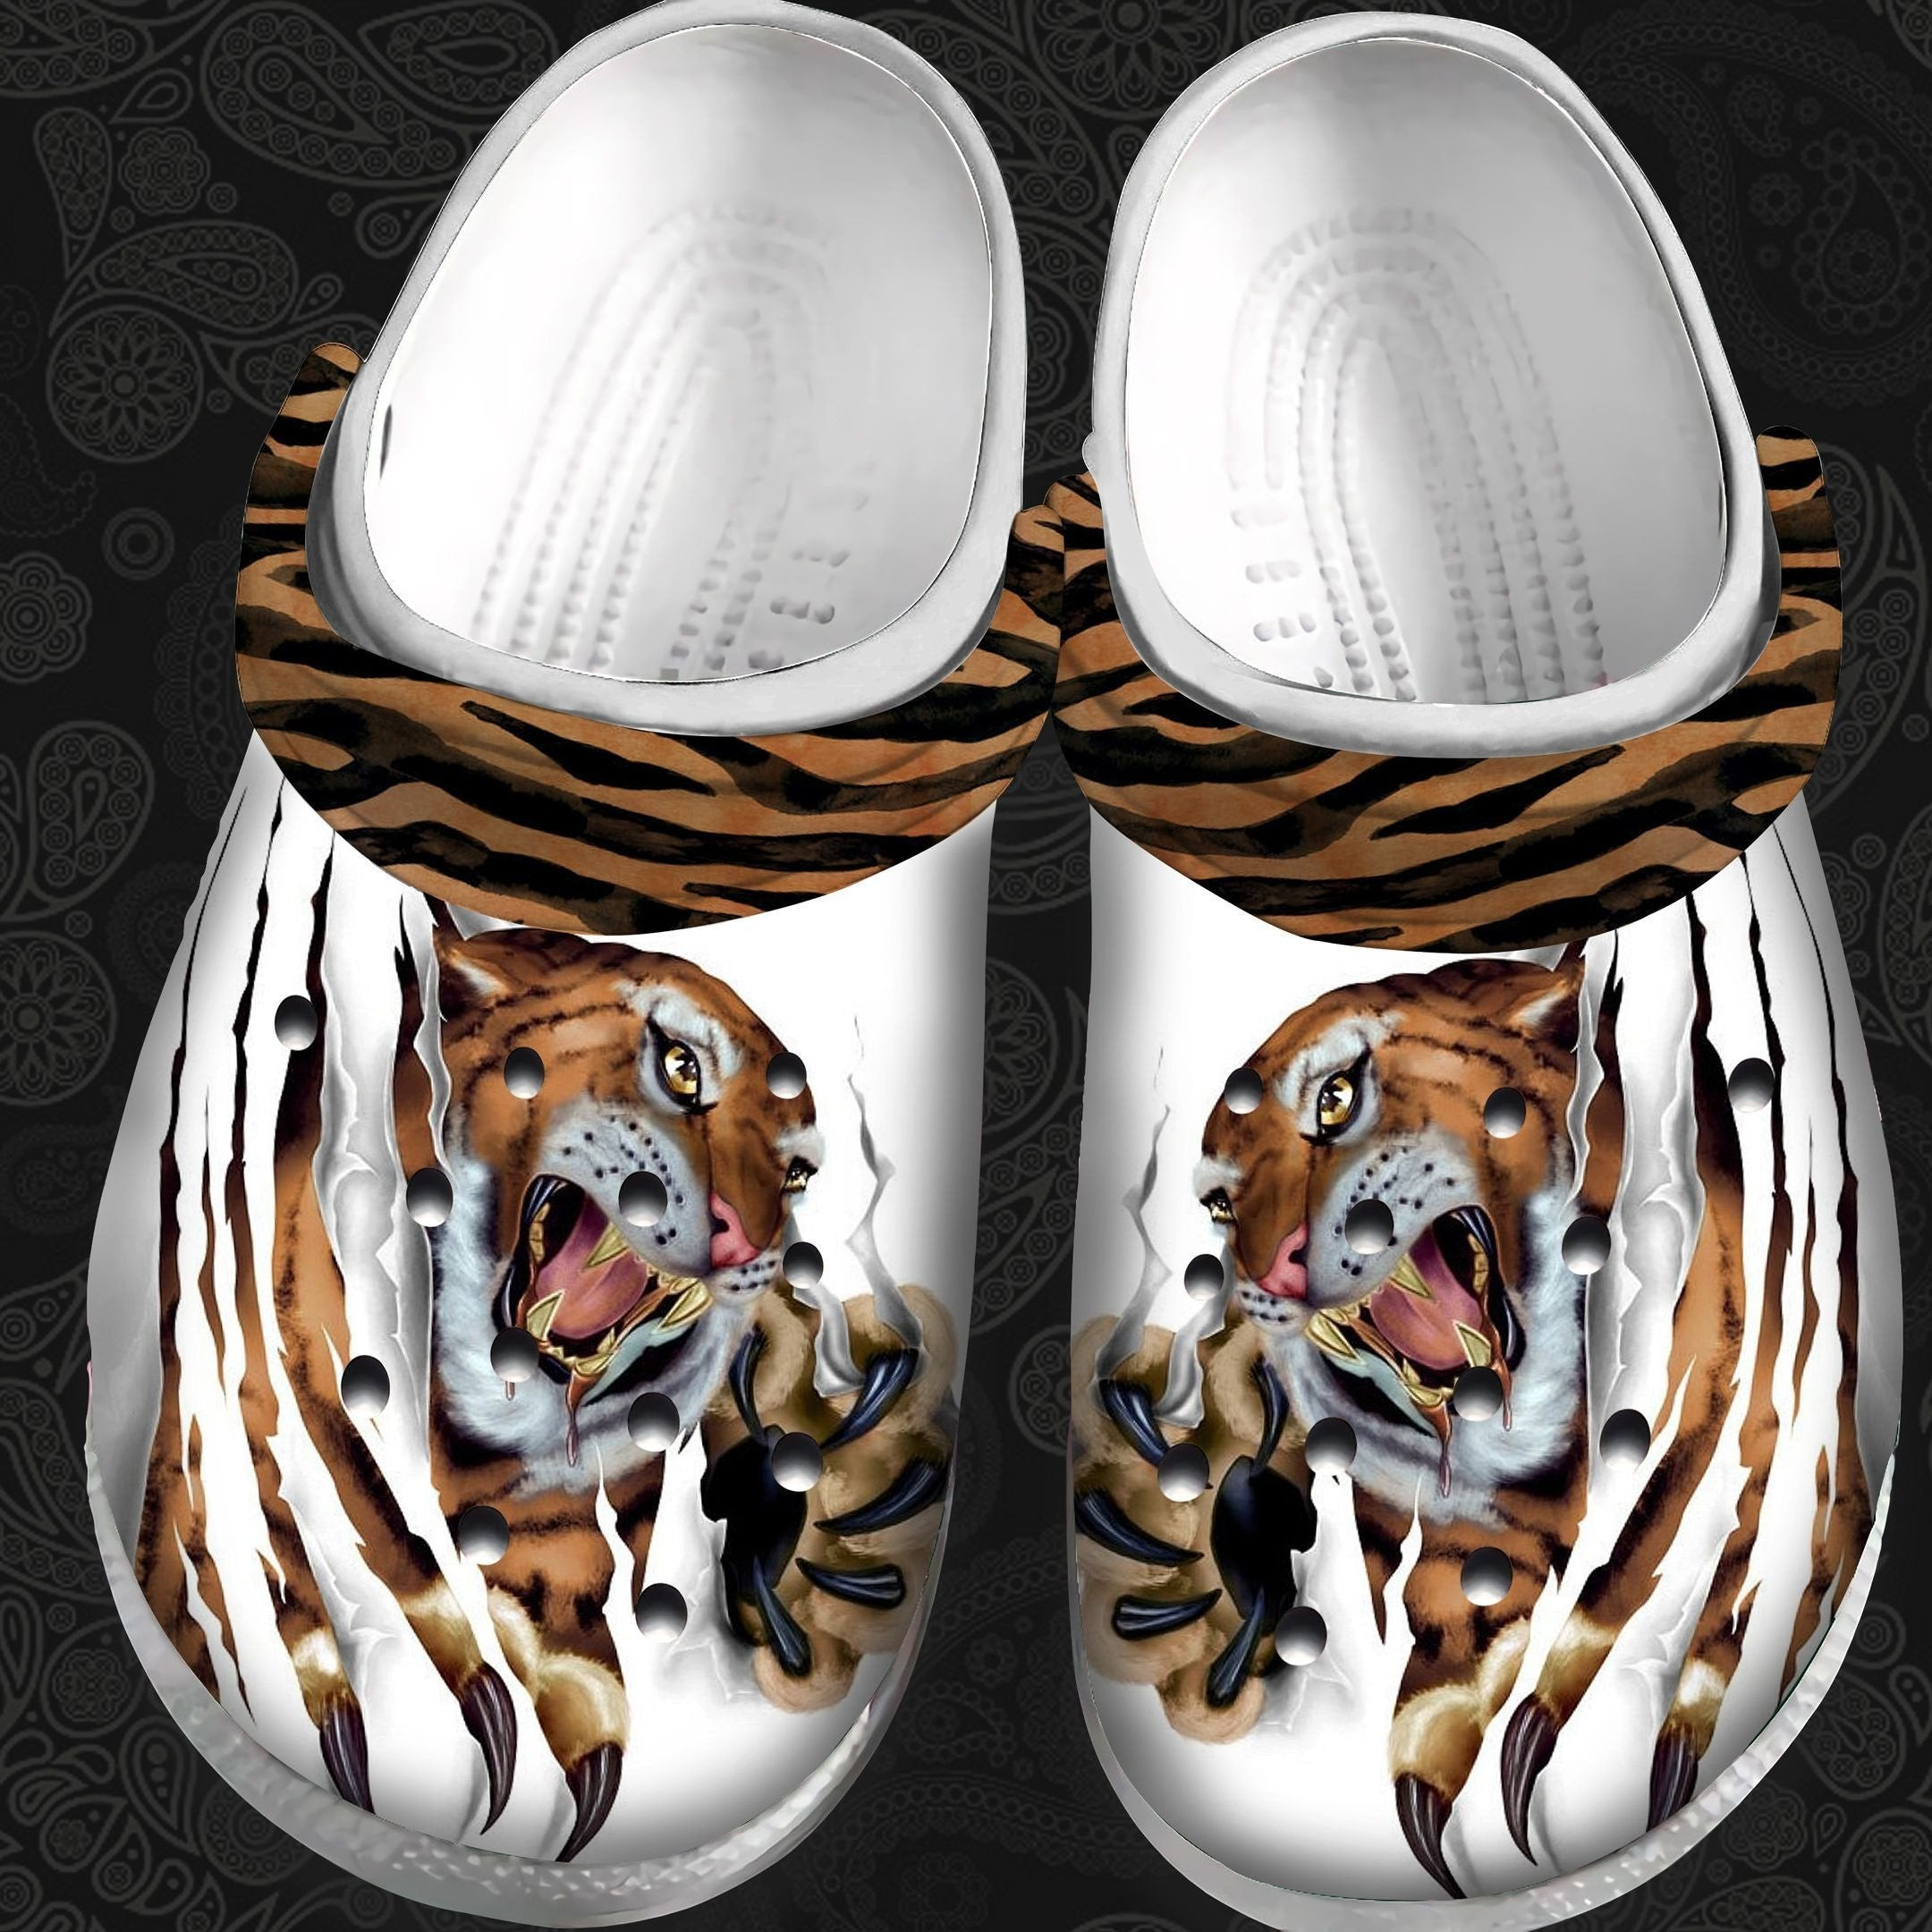 Strong Tiger 3D Crocs Shoes Clogs Father Day Gifts - Tiger Skin Camouflage Crocs Shoes Clogs Birthday Gift For Son Grandpa